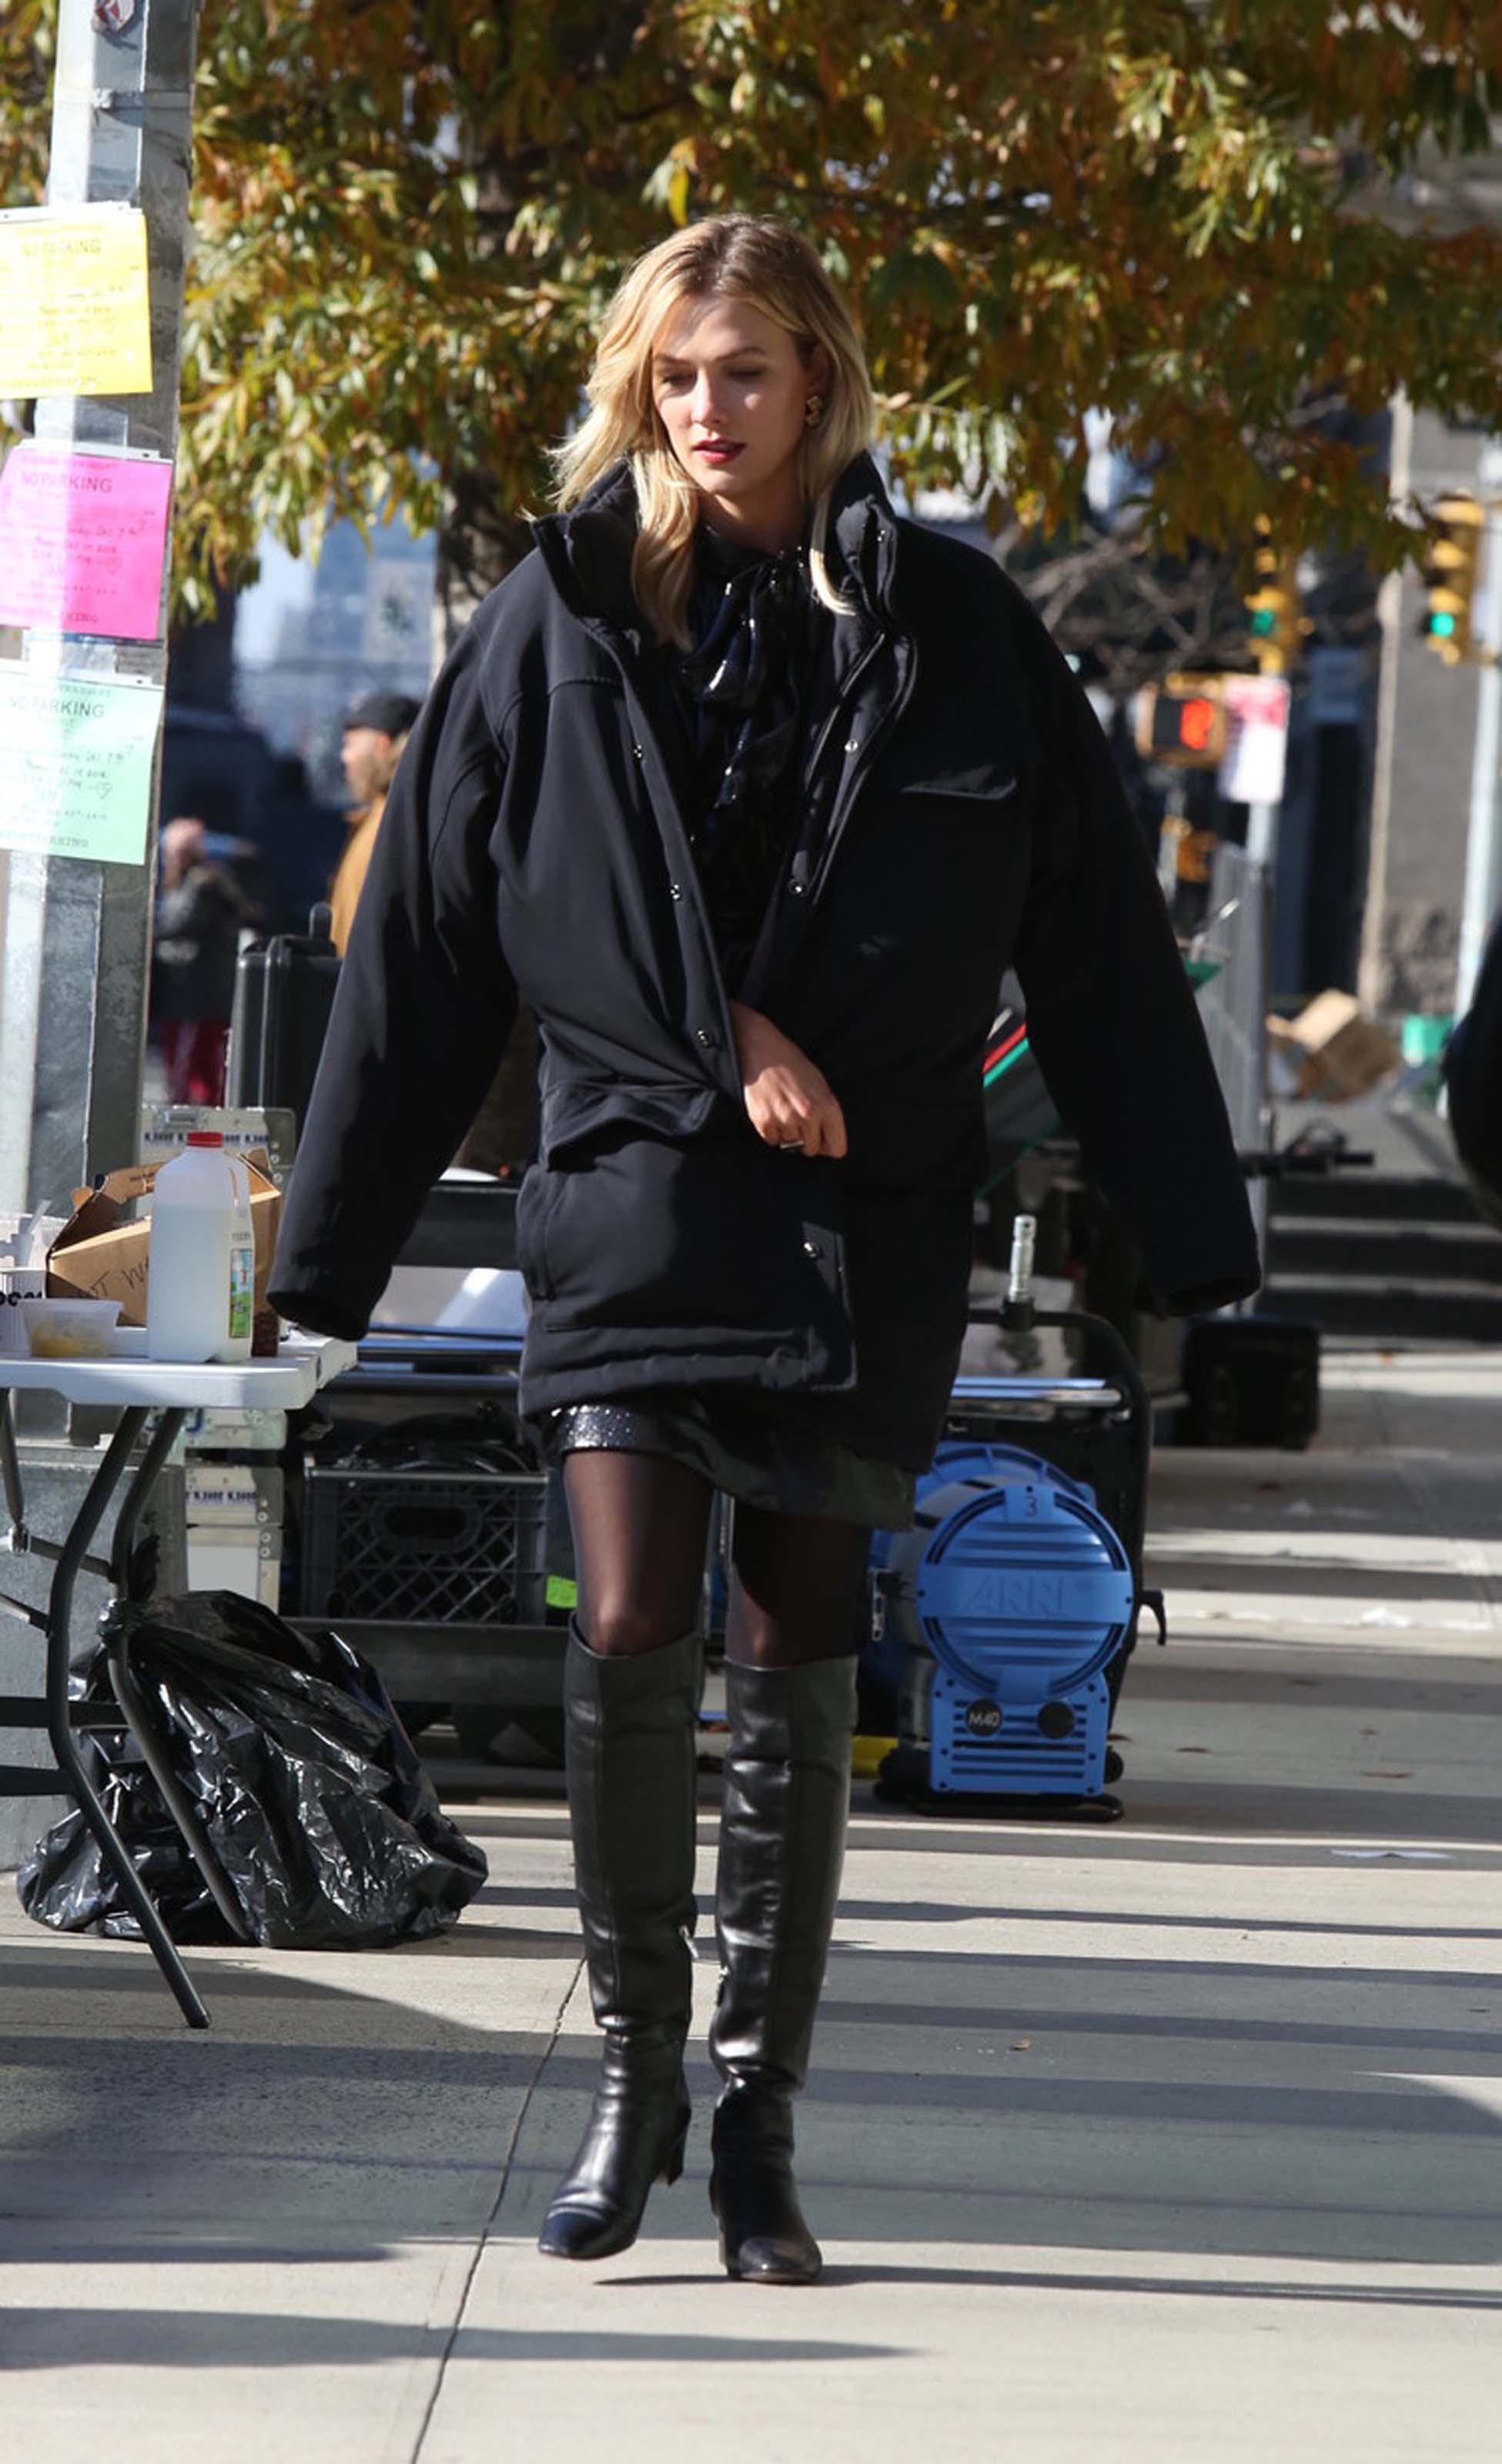 Karlie Kloss at a photoshoot in NYC